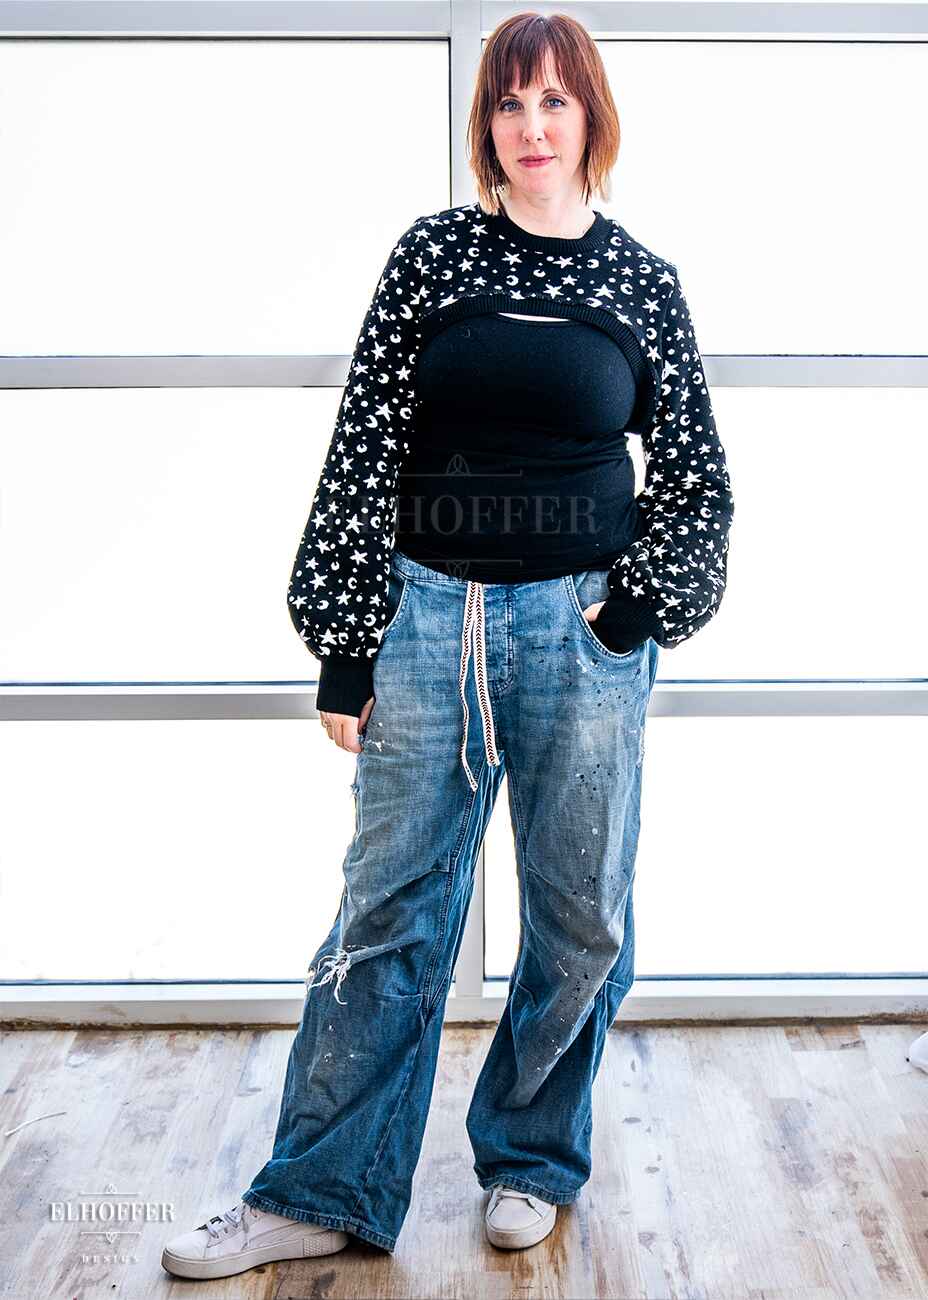 Jes, a fair skinned S model with short red hair and bangs, is wearing the L sample of a black crew neck super cropped knit shrug sweater with a white star and moon pattern, long billowing sleeves and thumbholes.